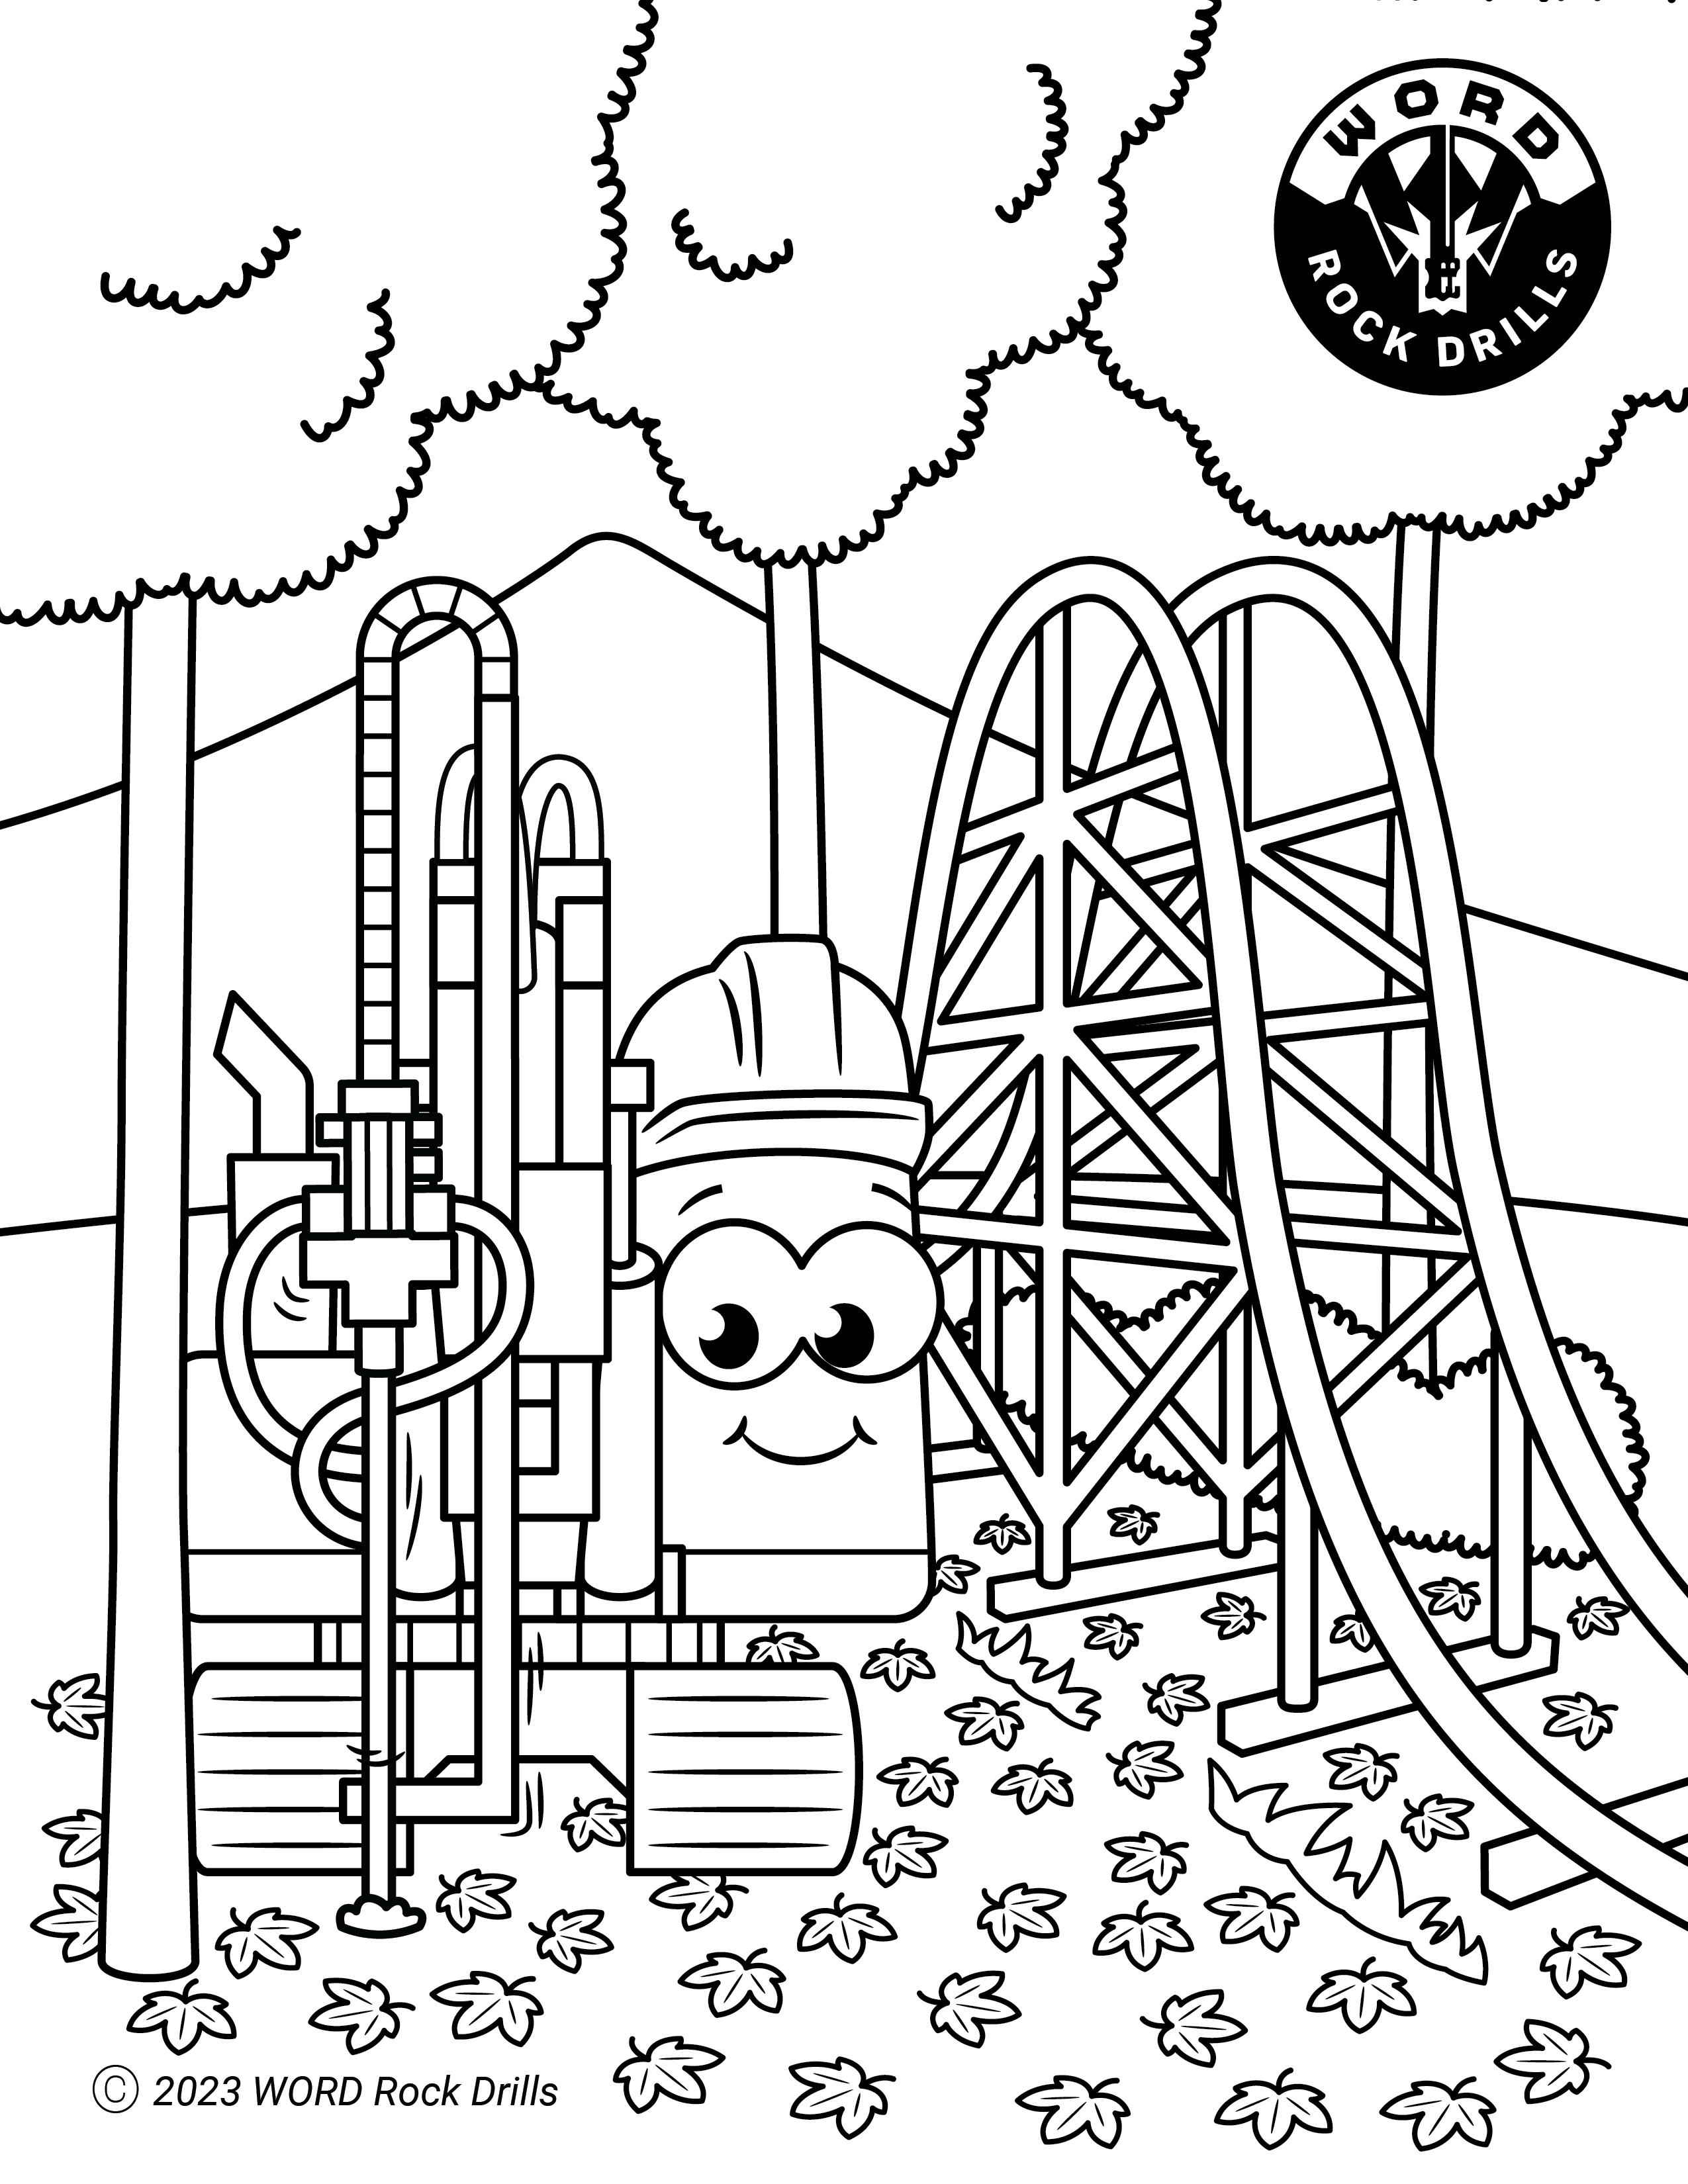 Free rock drill coloring pages to pass the time word rock drills